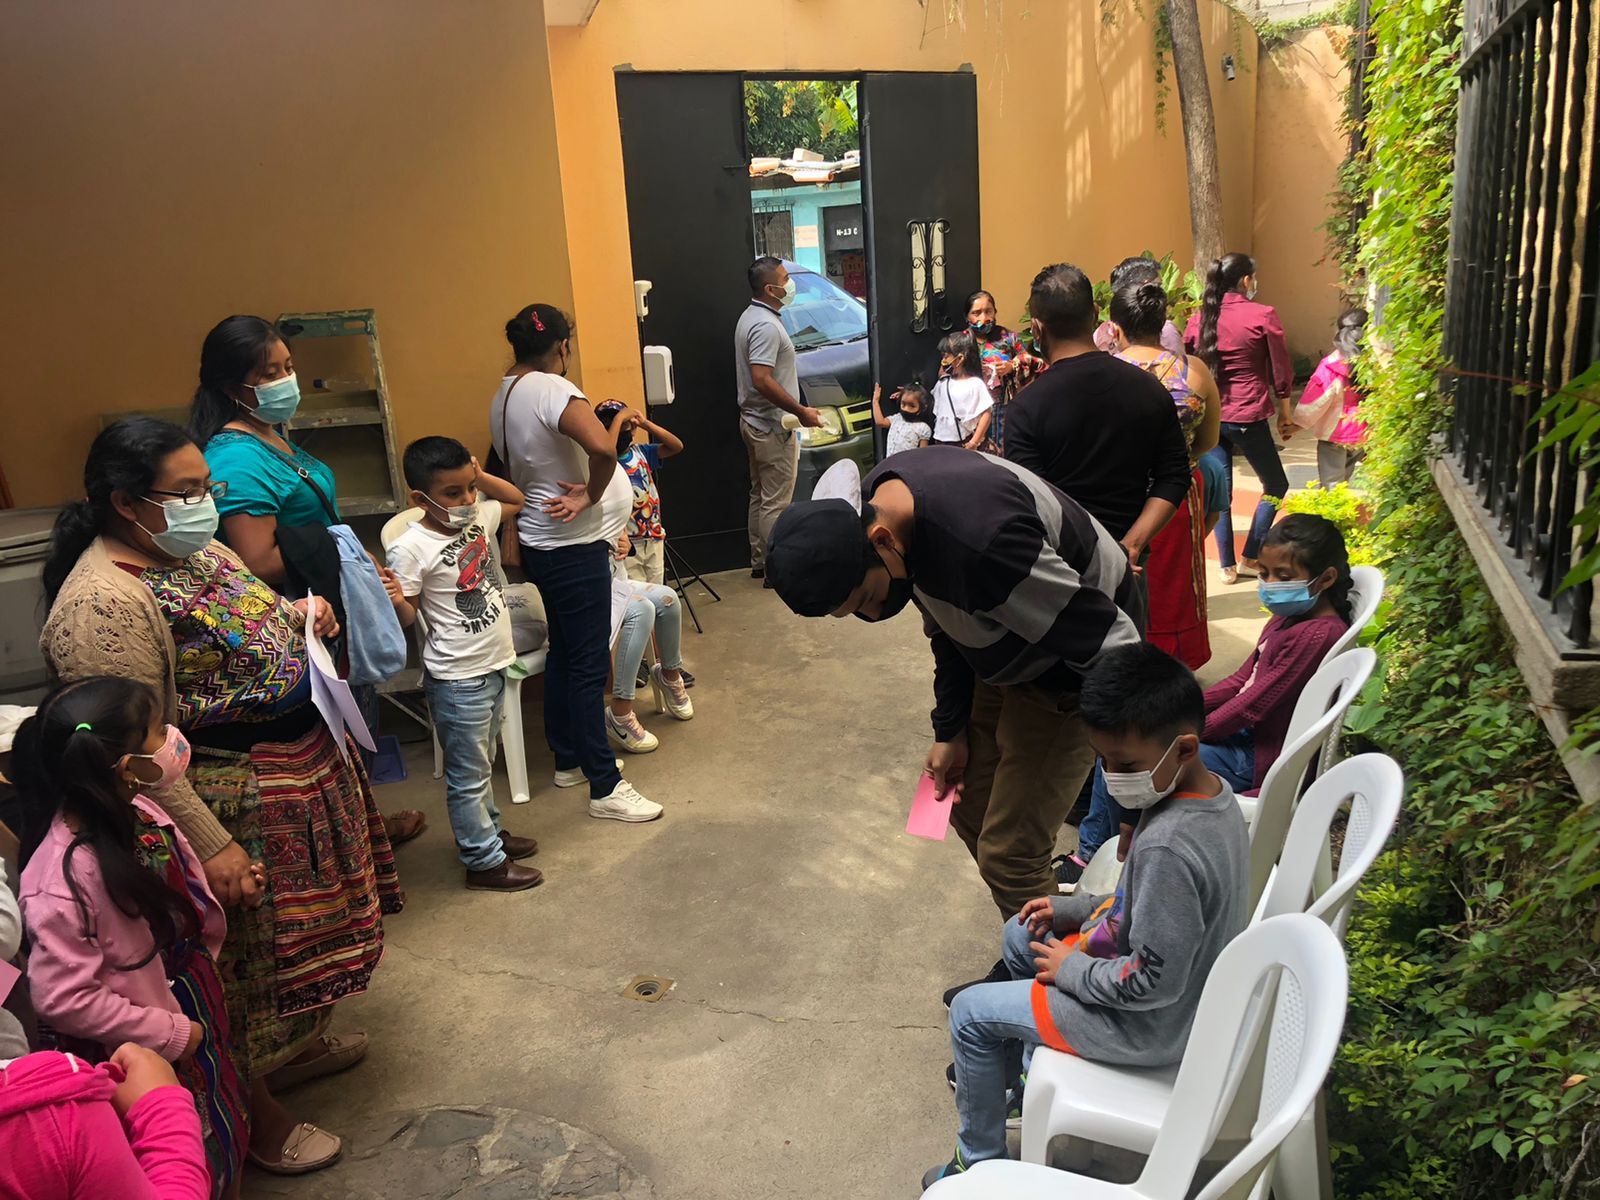 Students and parents wait to enroll at Escuela Integrada’s new location.